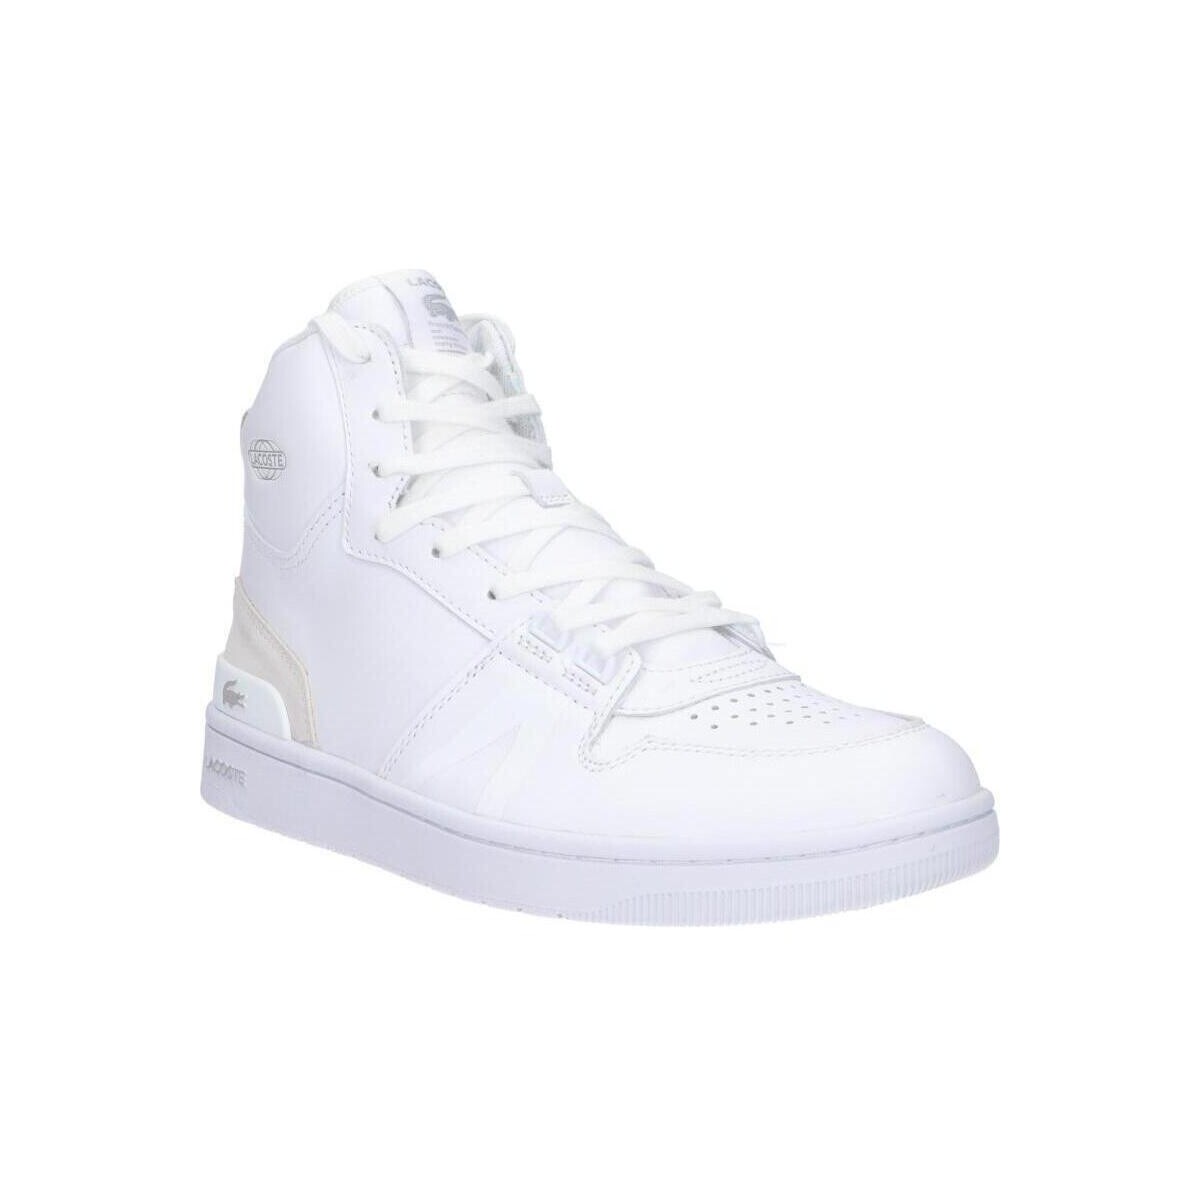 Chaussures Homme Multisport Lacoste 46SMA0032 L001 MID 46SMA0032 L001 MID 